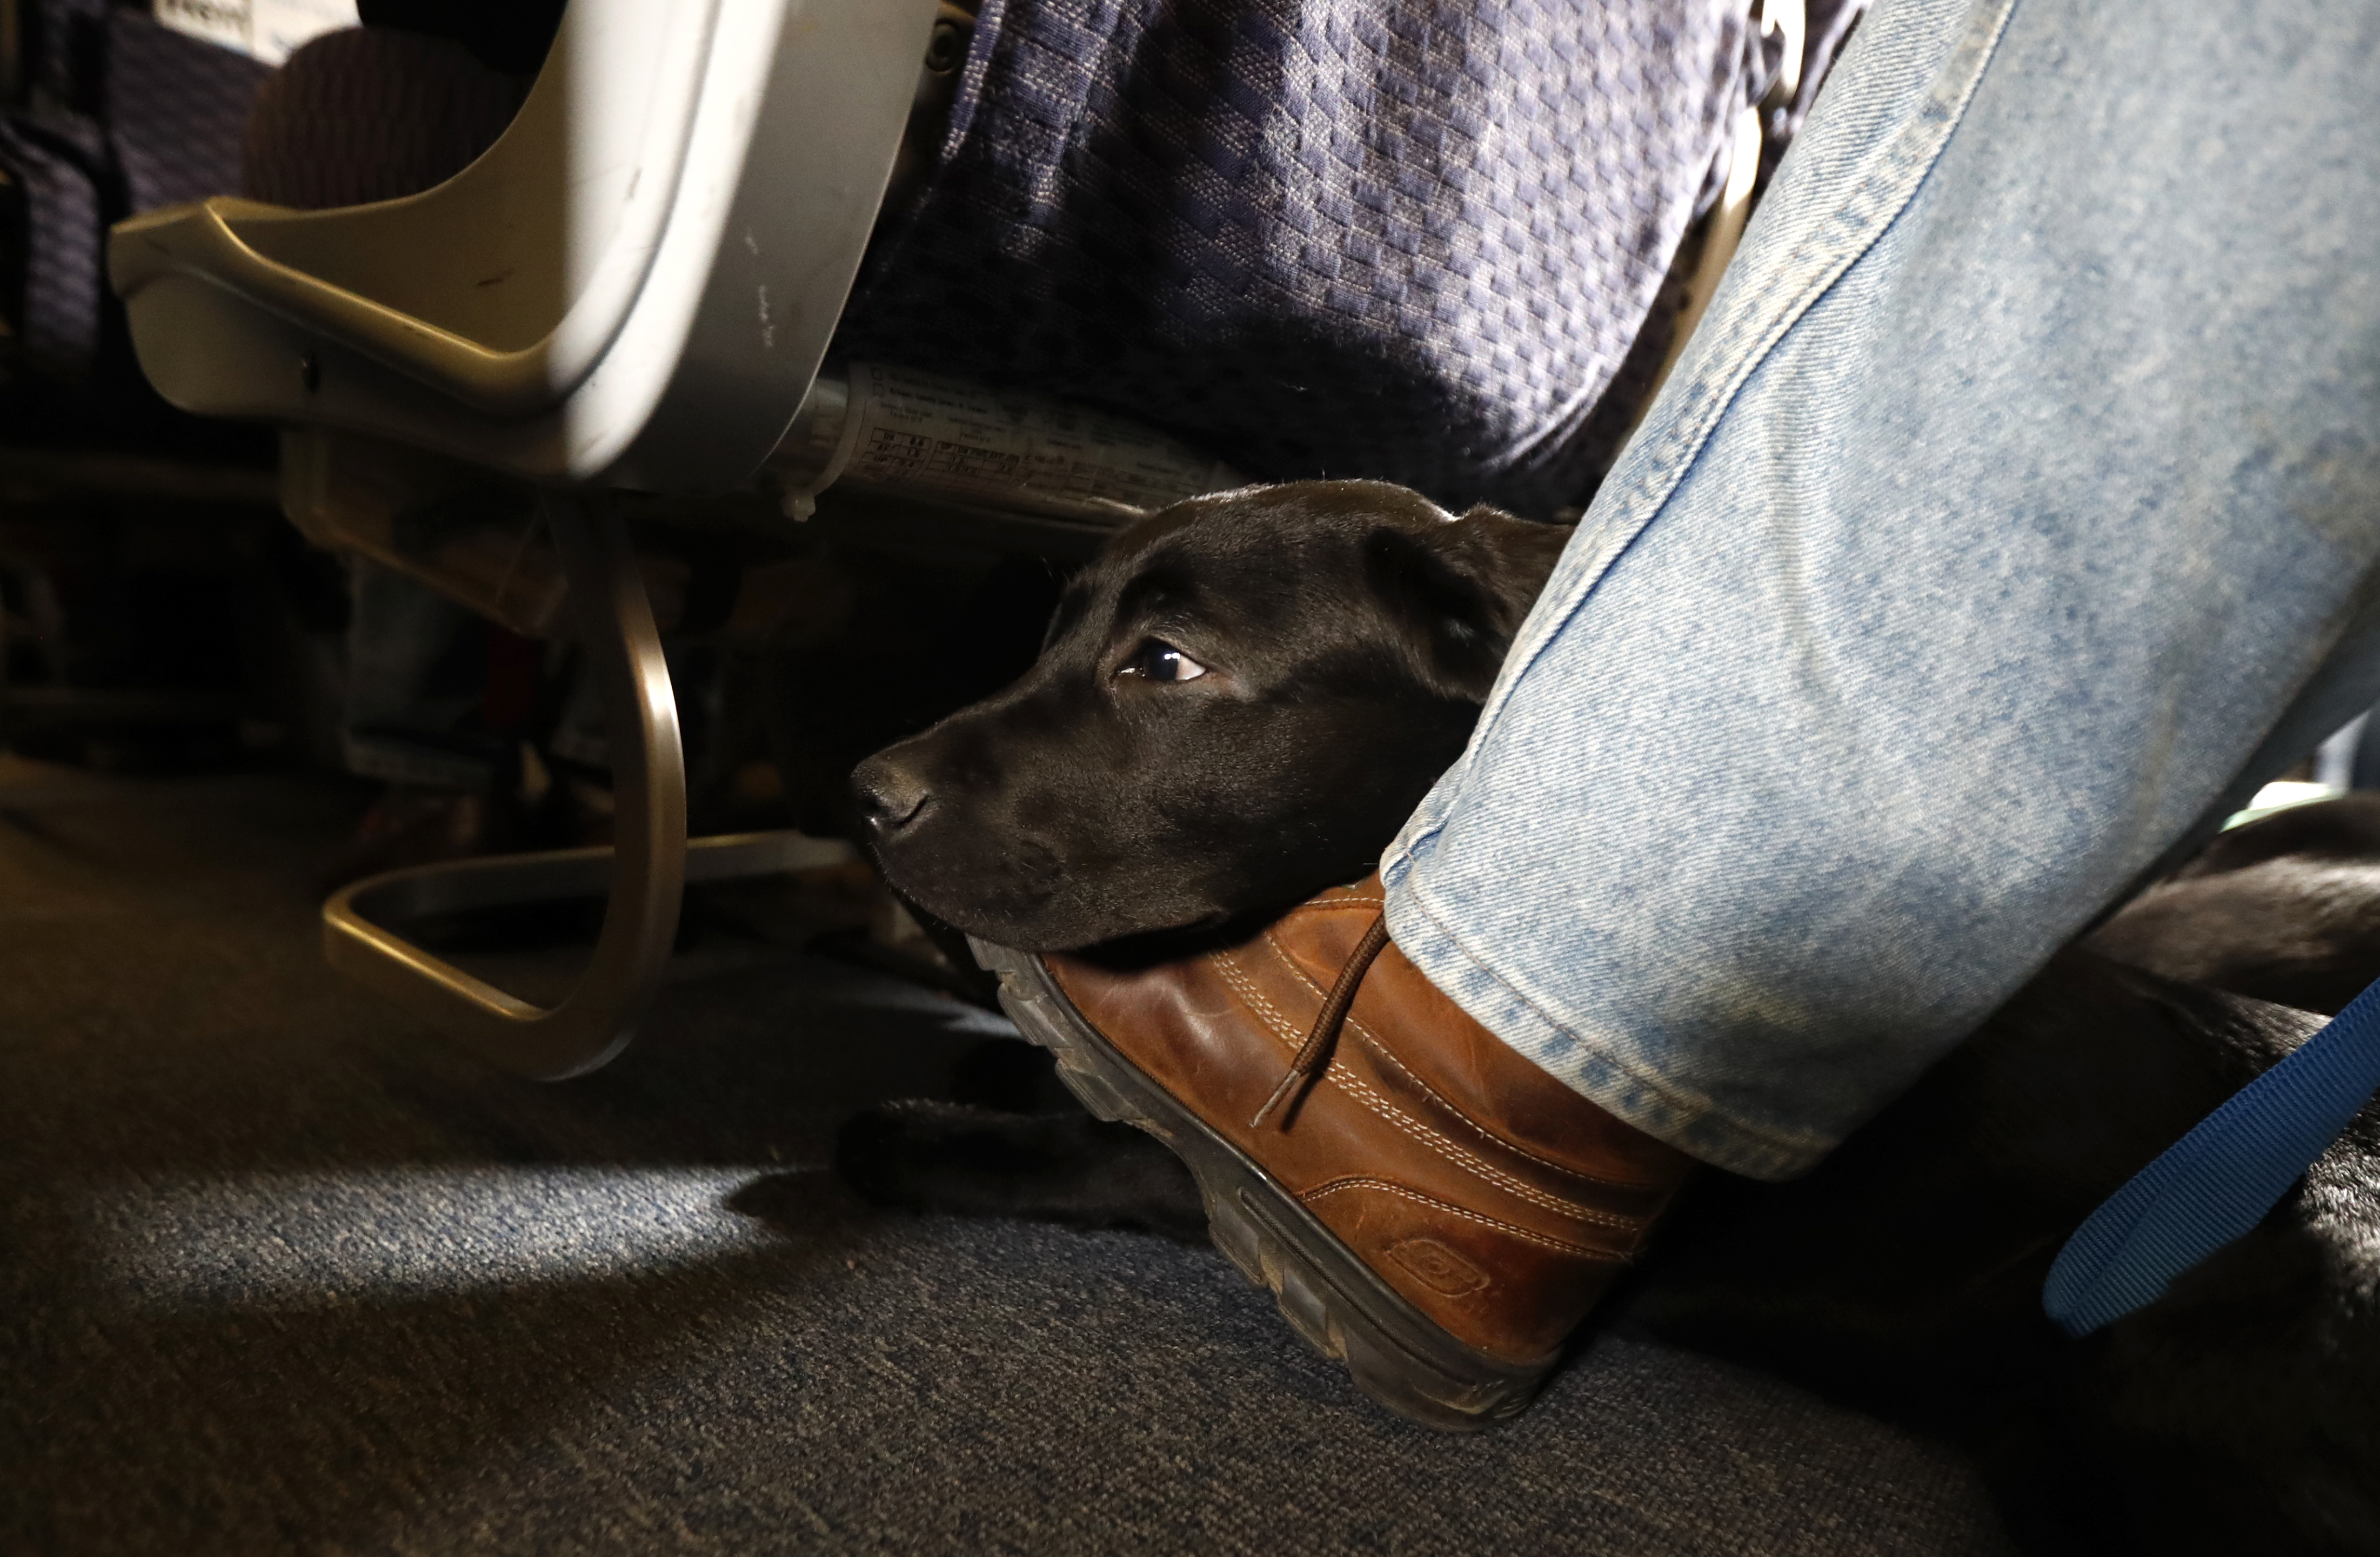 FILE - In this Saturday, April 1, 2017, file photo, a service dog named Orlando rests on the foot of its trainer, John Reddan, while sitting inside a United Airlines plane at Newark Liberty International Airport during a training exercise, in Newark, N.J. United Airlines wants to see more paperwork before passengers fly with an emotional-support animal. United says the changes won't affect owners of legitimate service animals with special training. (AP Photo/Julio Cortez, File)